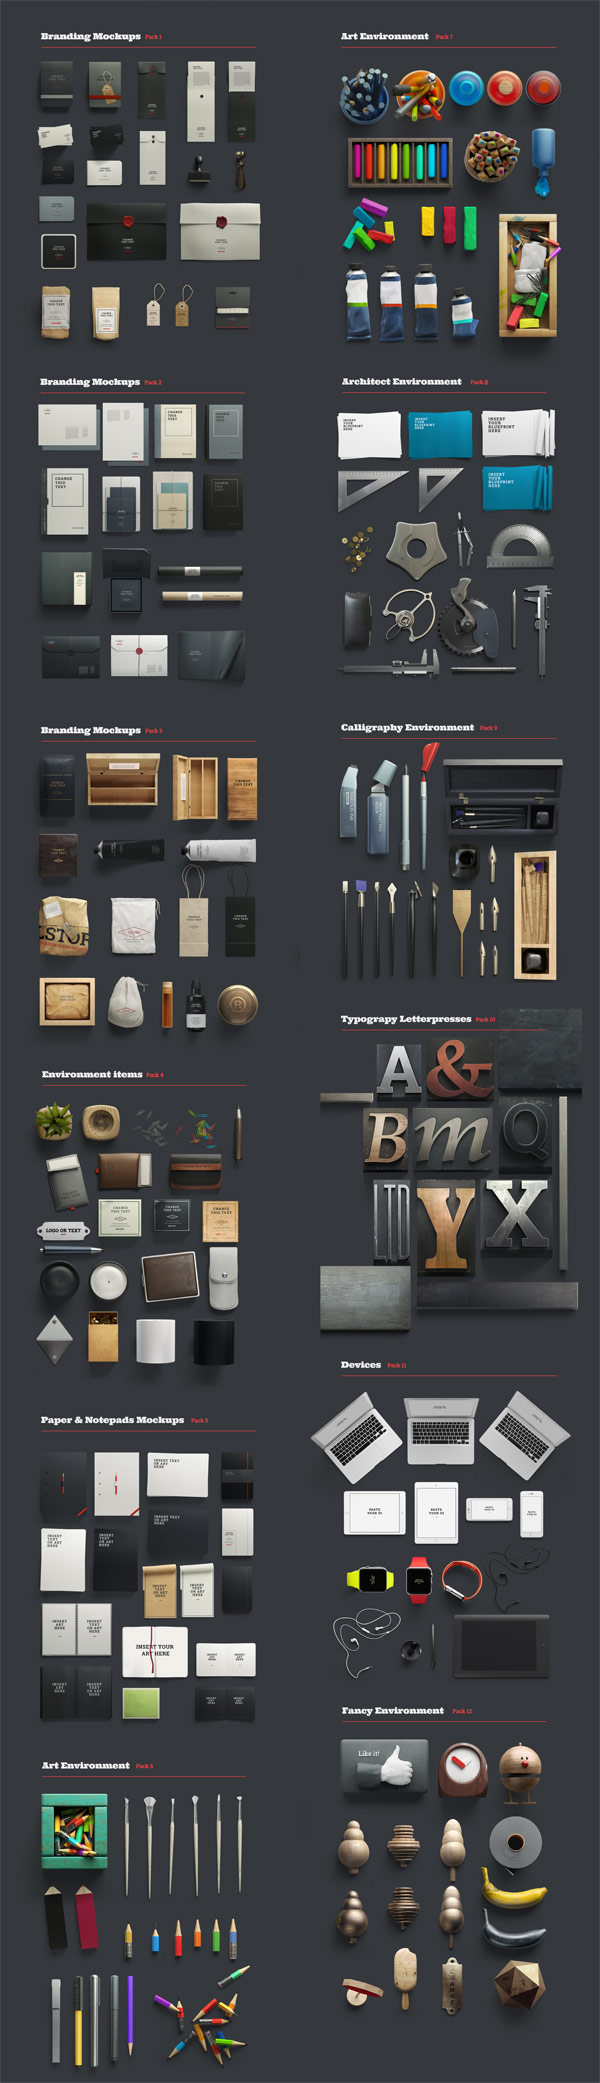 All the included items and objects from all 12 categories.